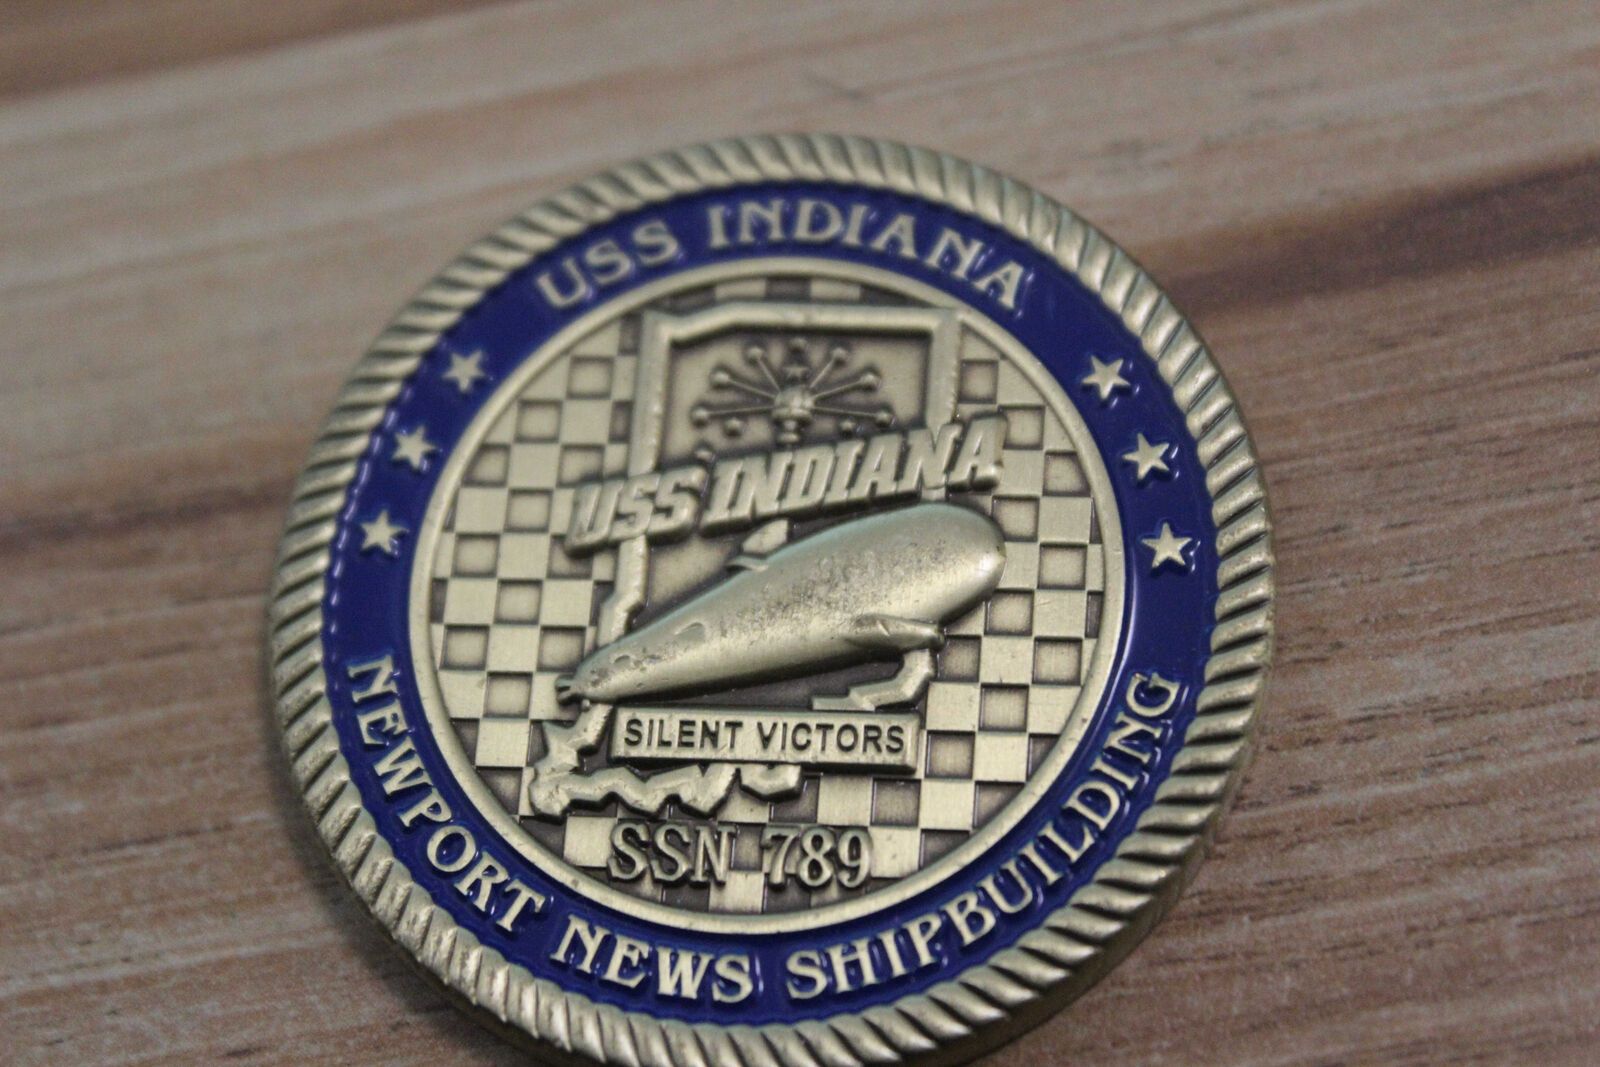 USS Indiana SSN 789 Challenge Coin